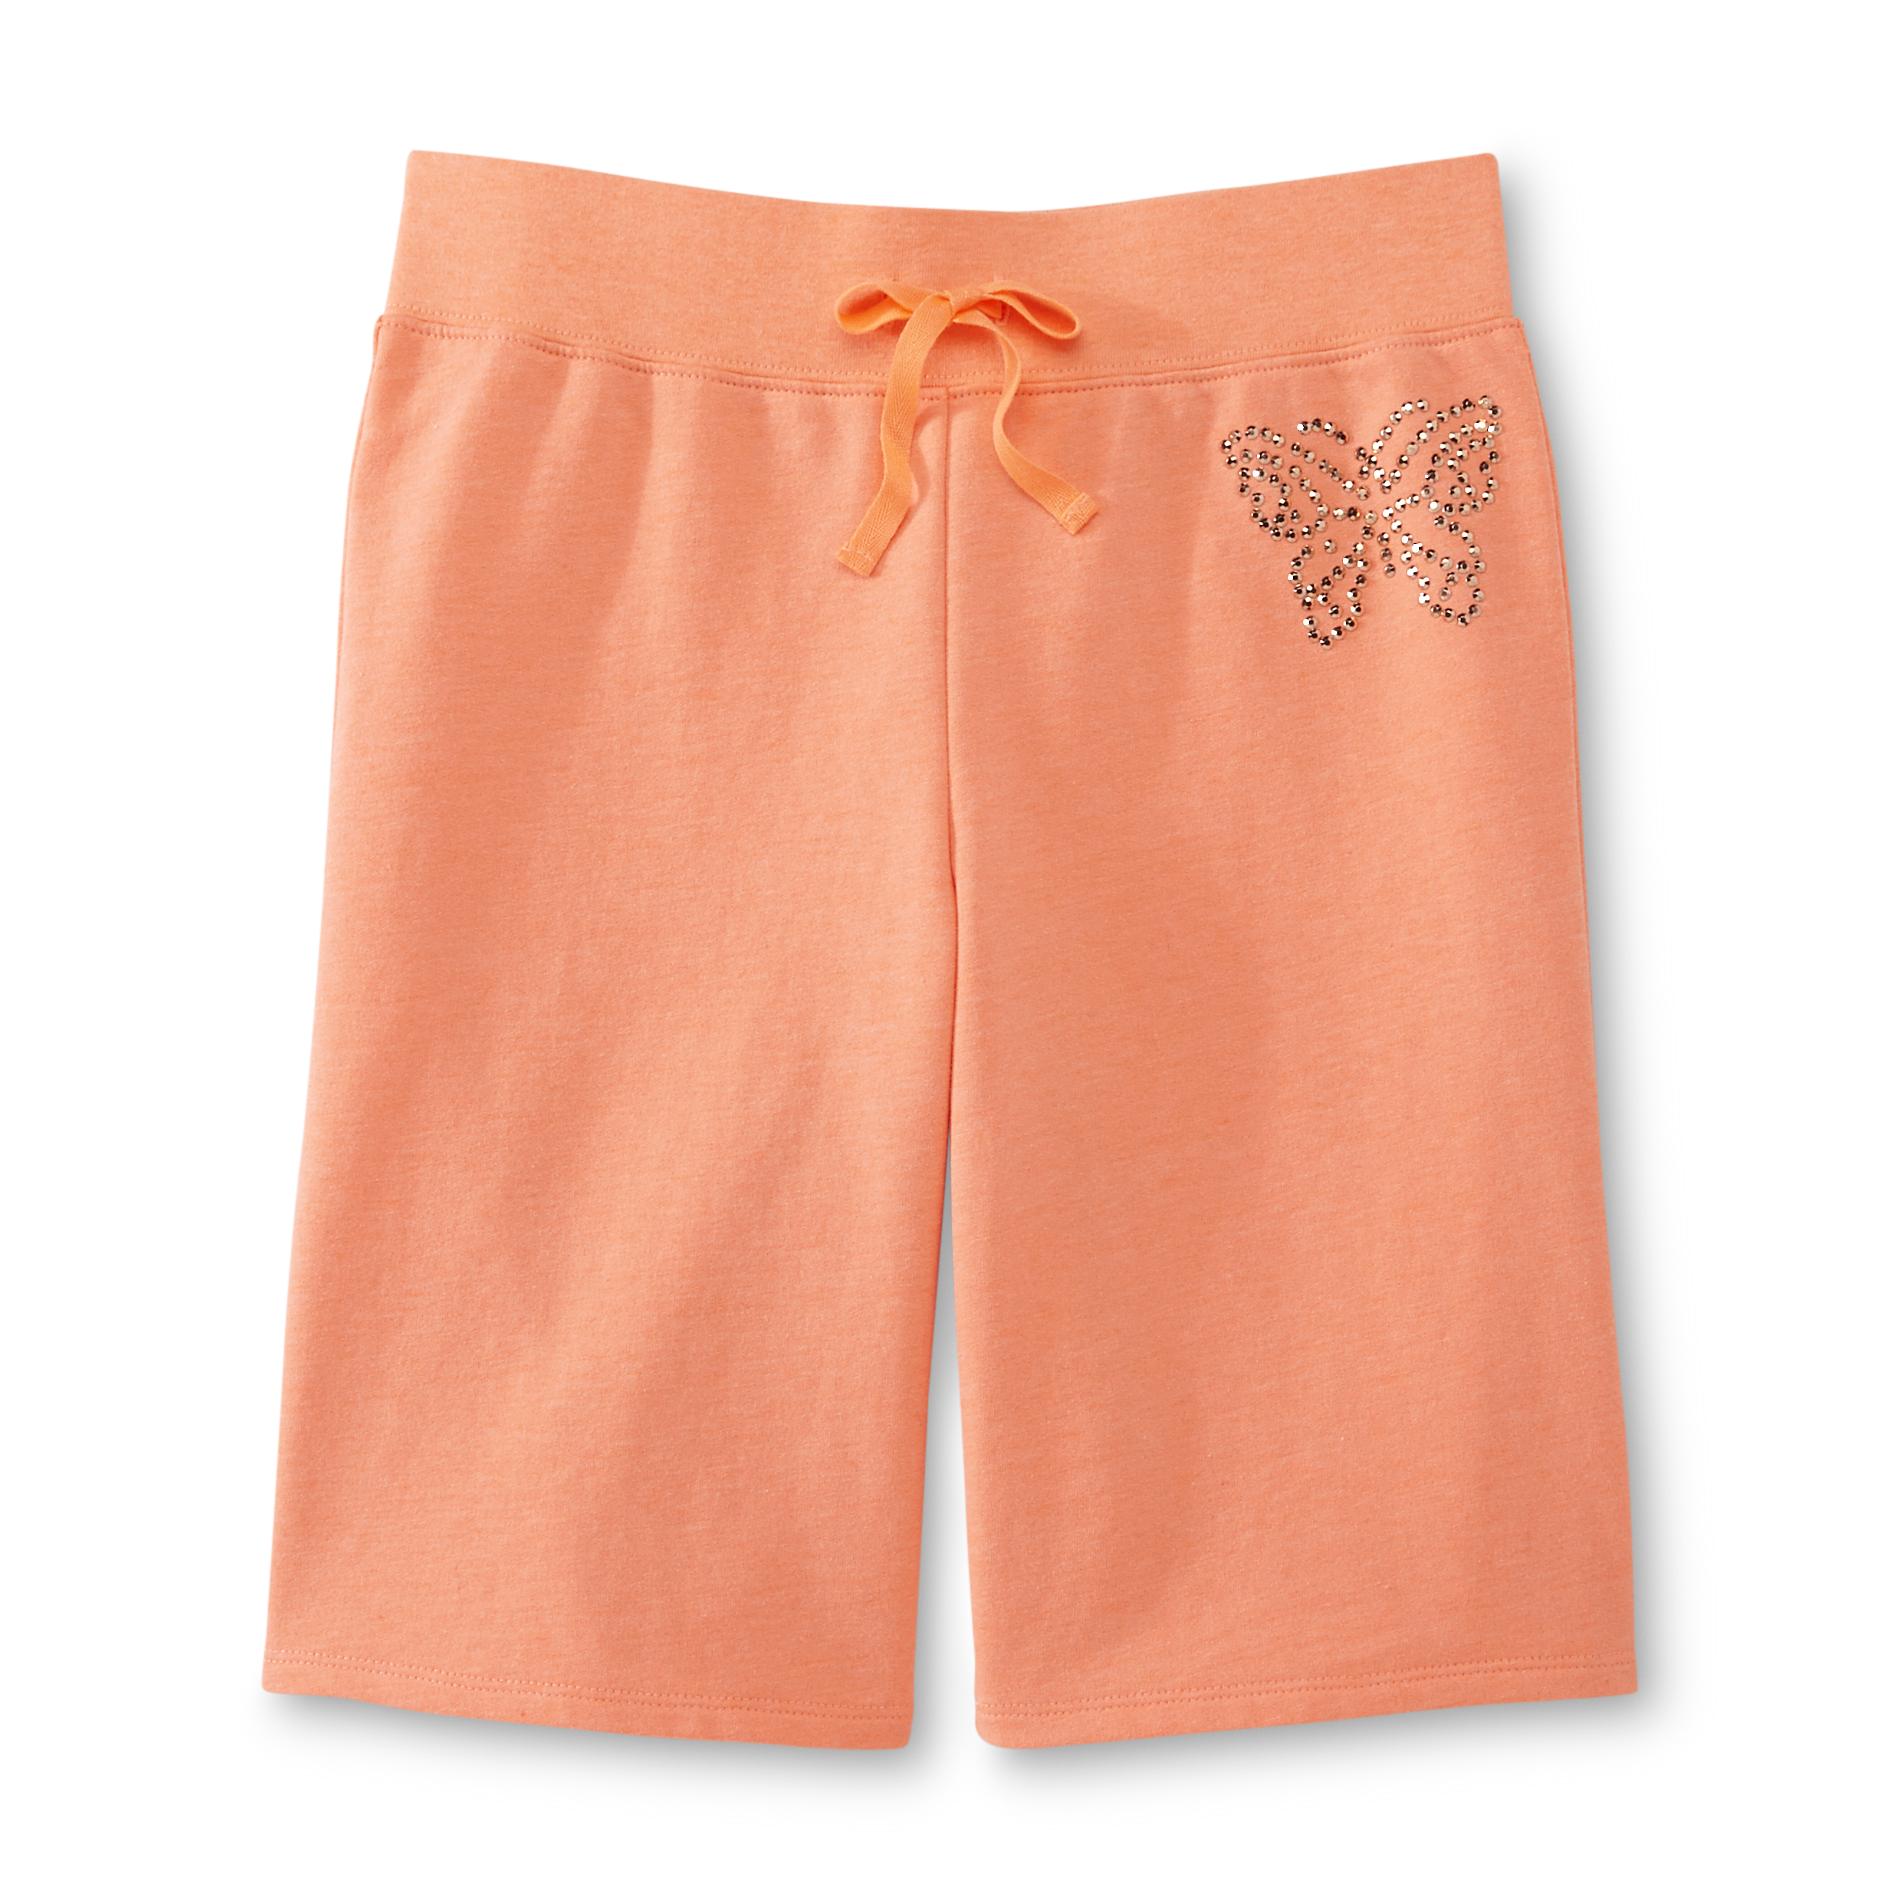 Canyon River Blues Girl's French Terry Bermuda Shorts